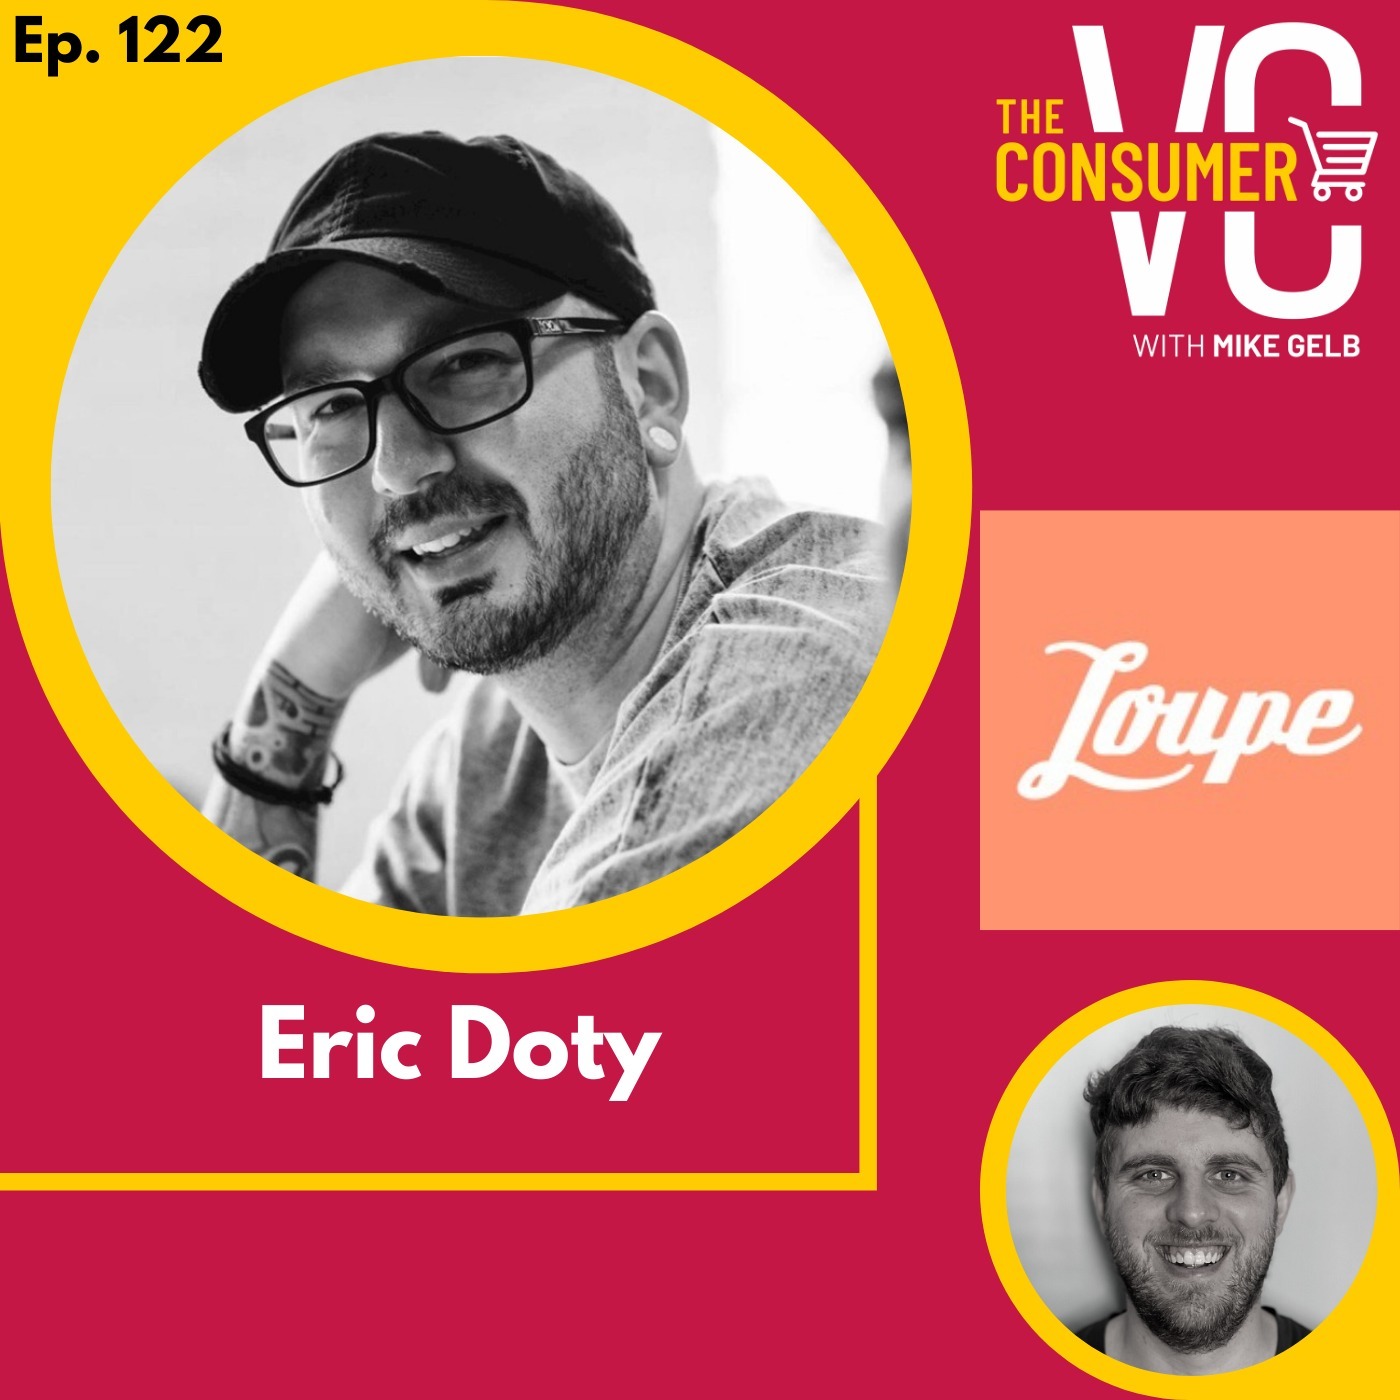 Eric Doty (Loupe) - Building the world's largest community of sports card collectors